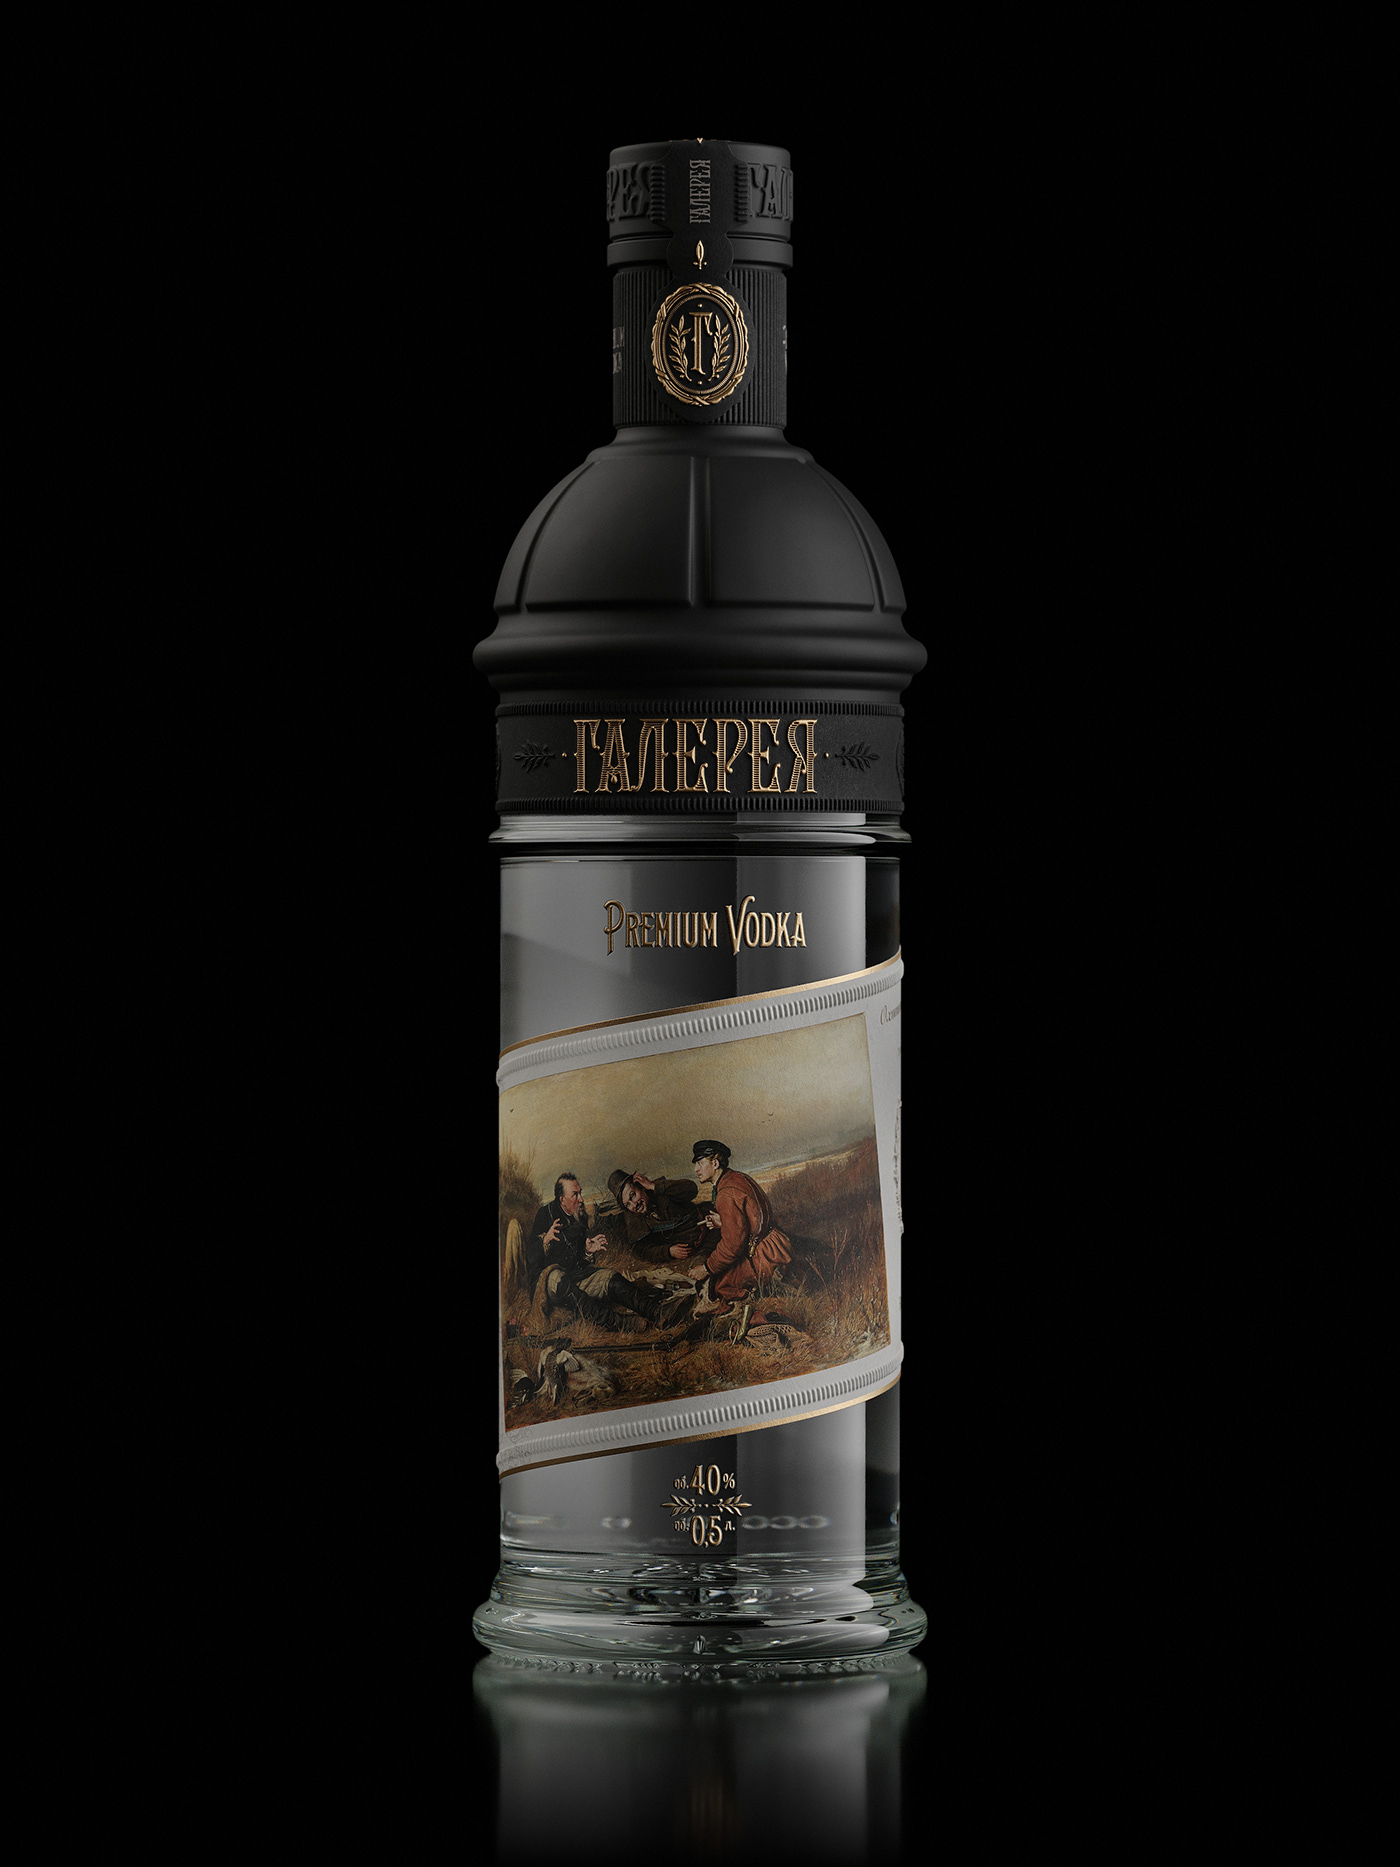 alcohol branding  gallery vodka packaging design Spirits Vodka 3d Visualisation Angus hume madewithmodo Andrey Stolyarevsky